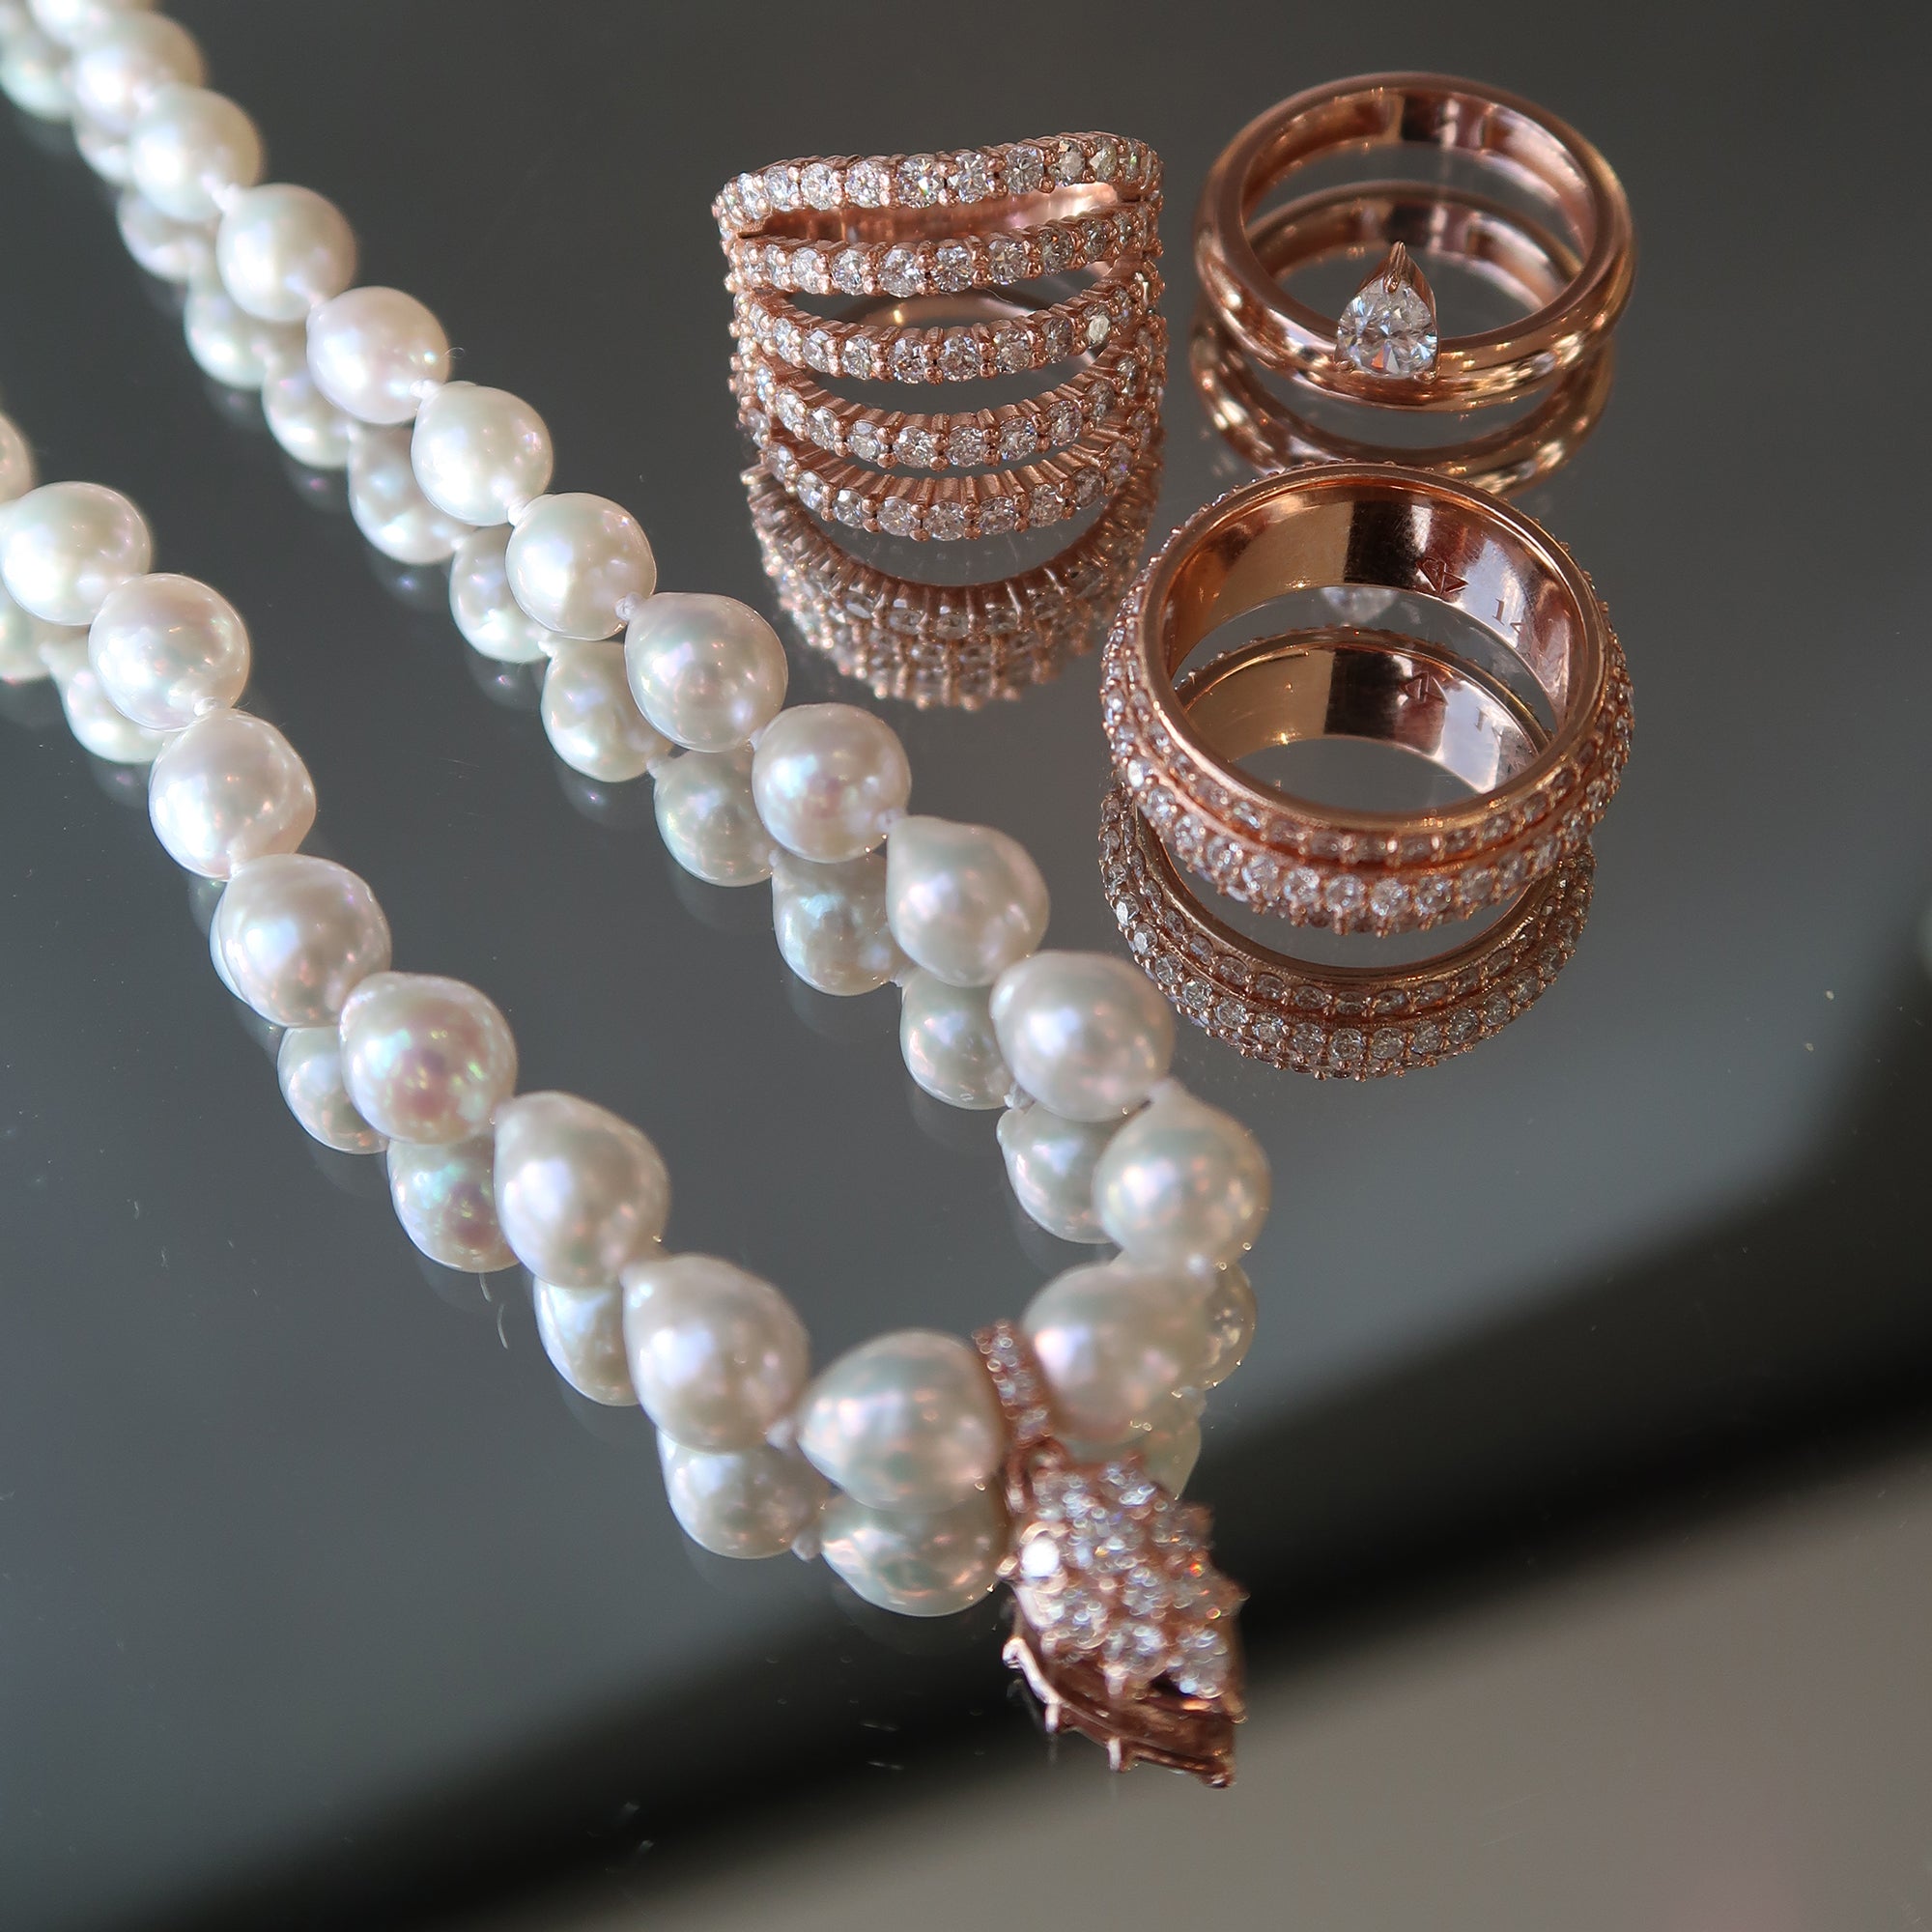 Pasha Pearl Necklace shown in Rose Gold